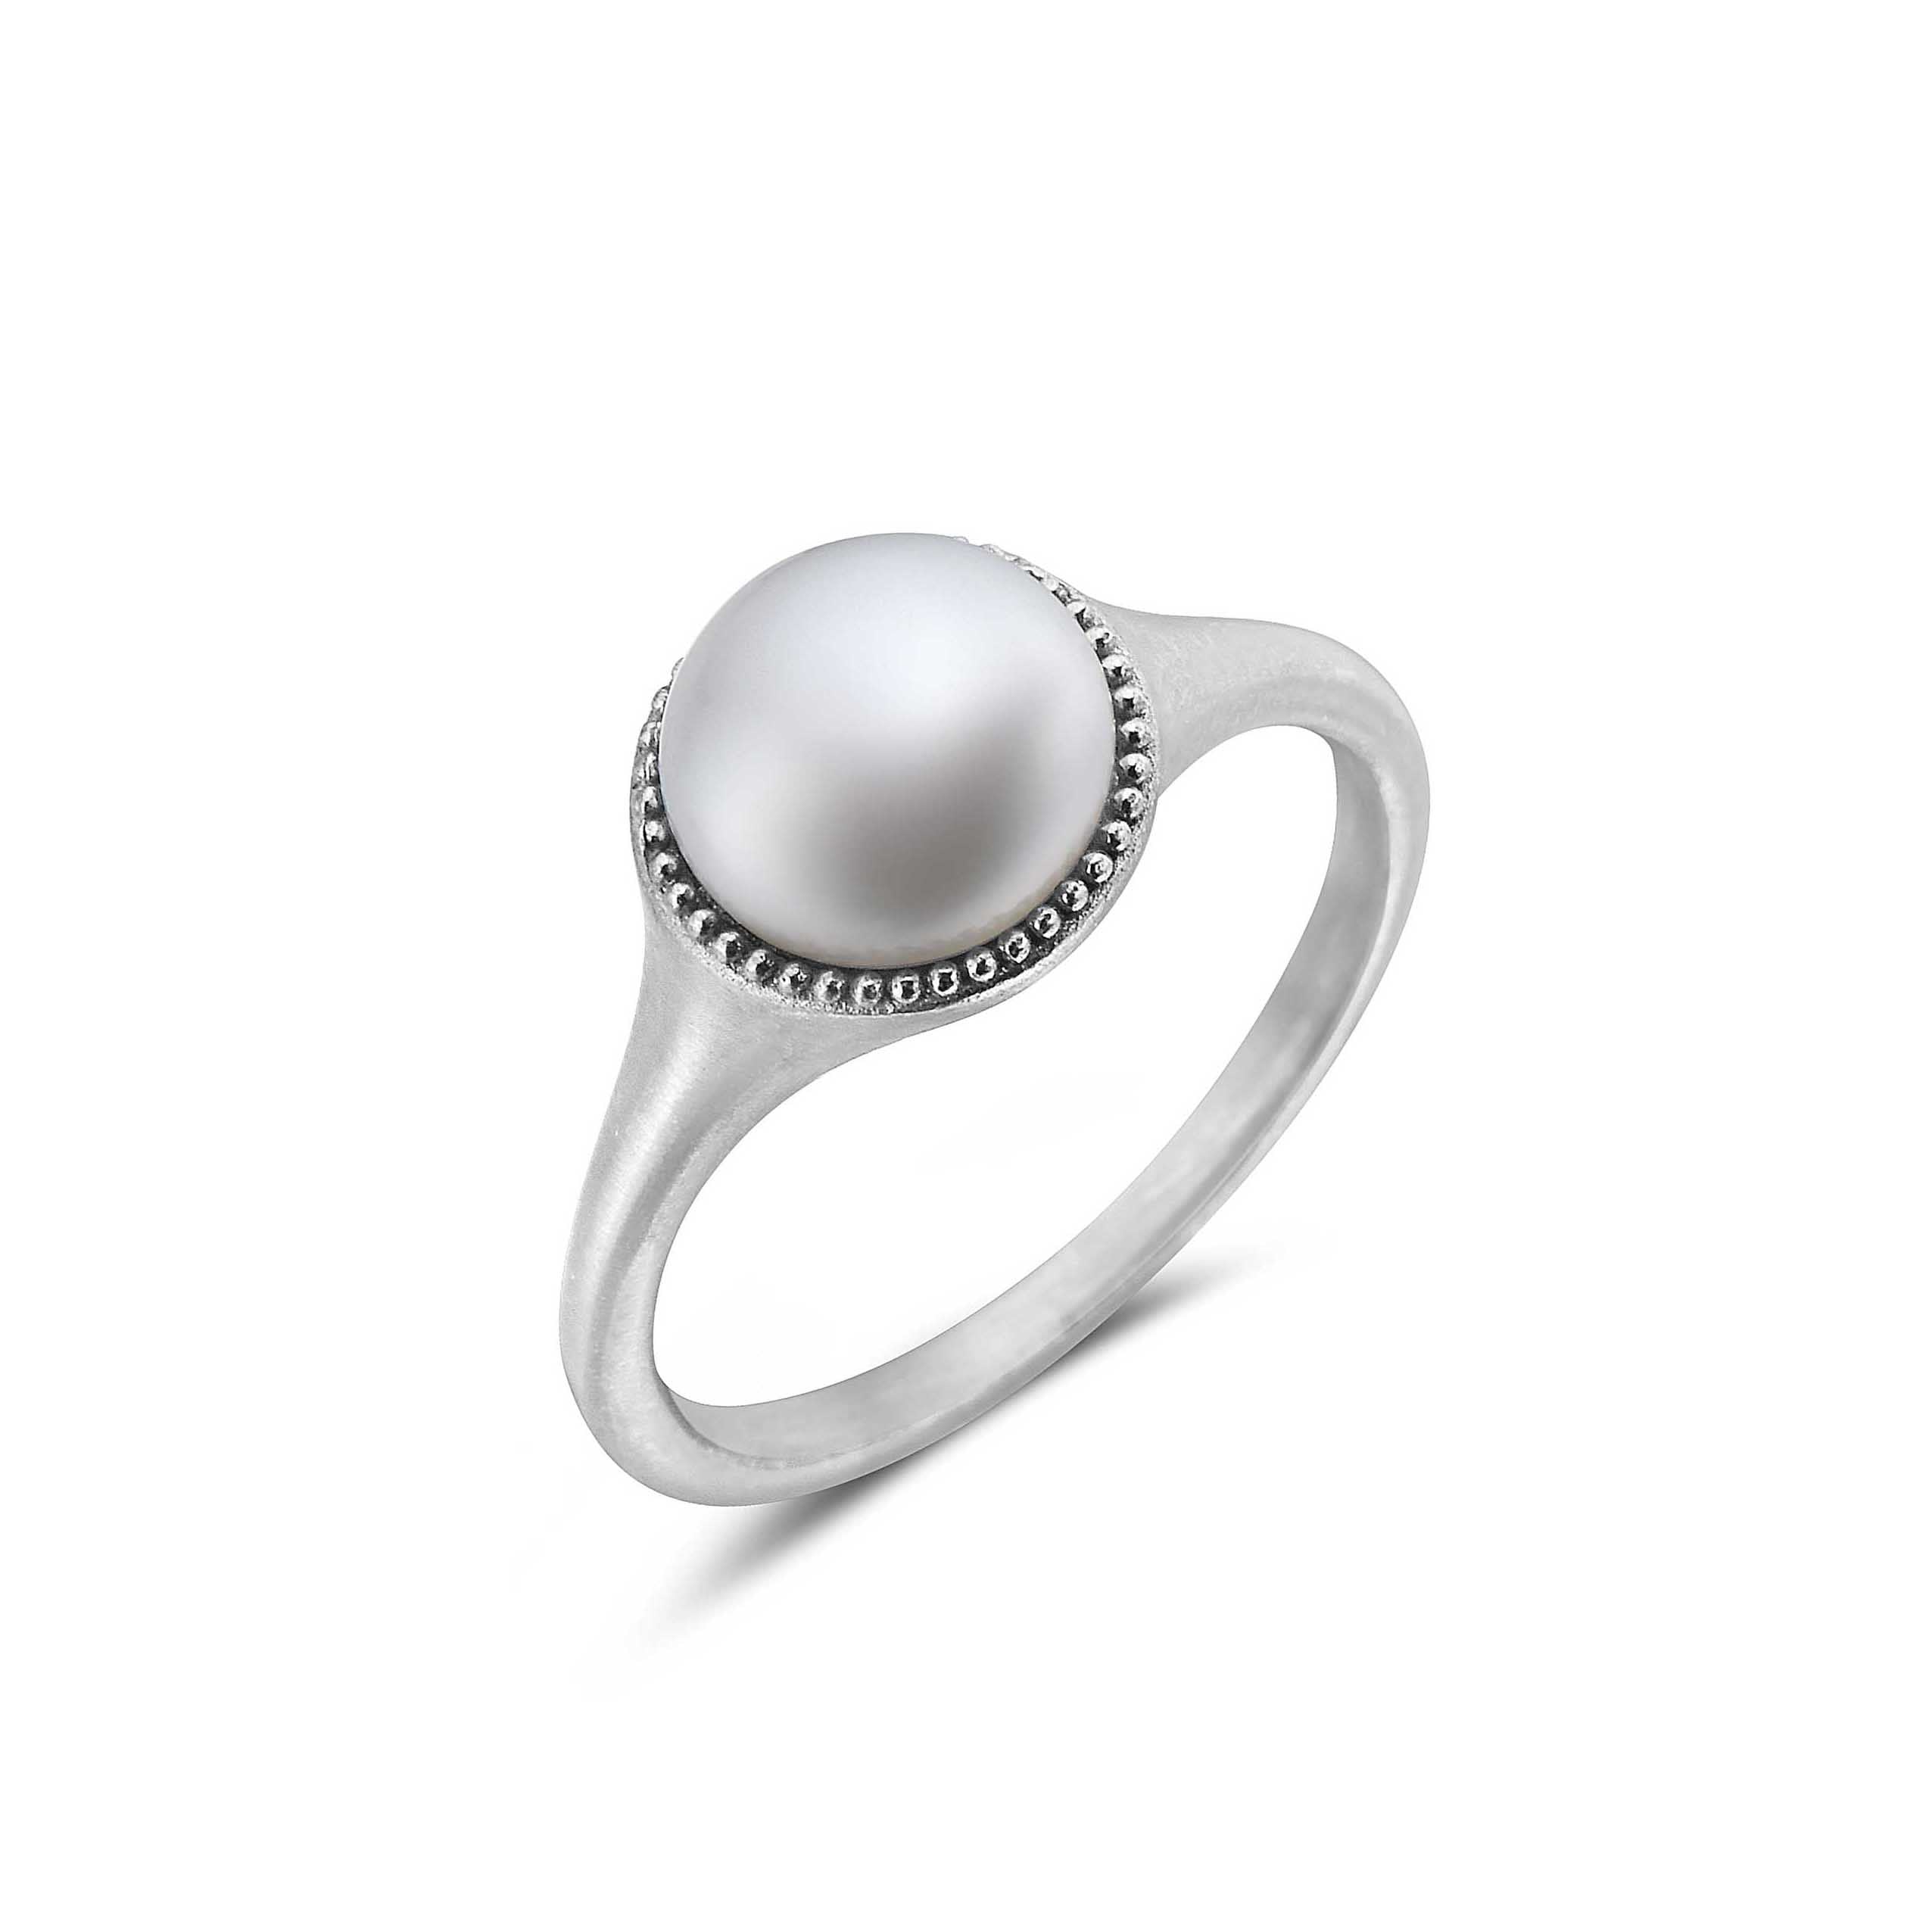 AR-6067-PE-5 Sterling Silver Small Round Shape Beautiful Simple Ring With White  Pearl – Bali Designs Inc